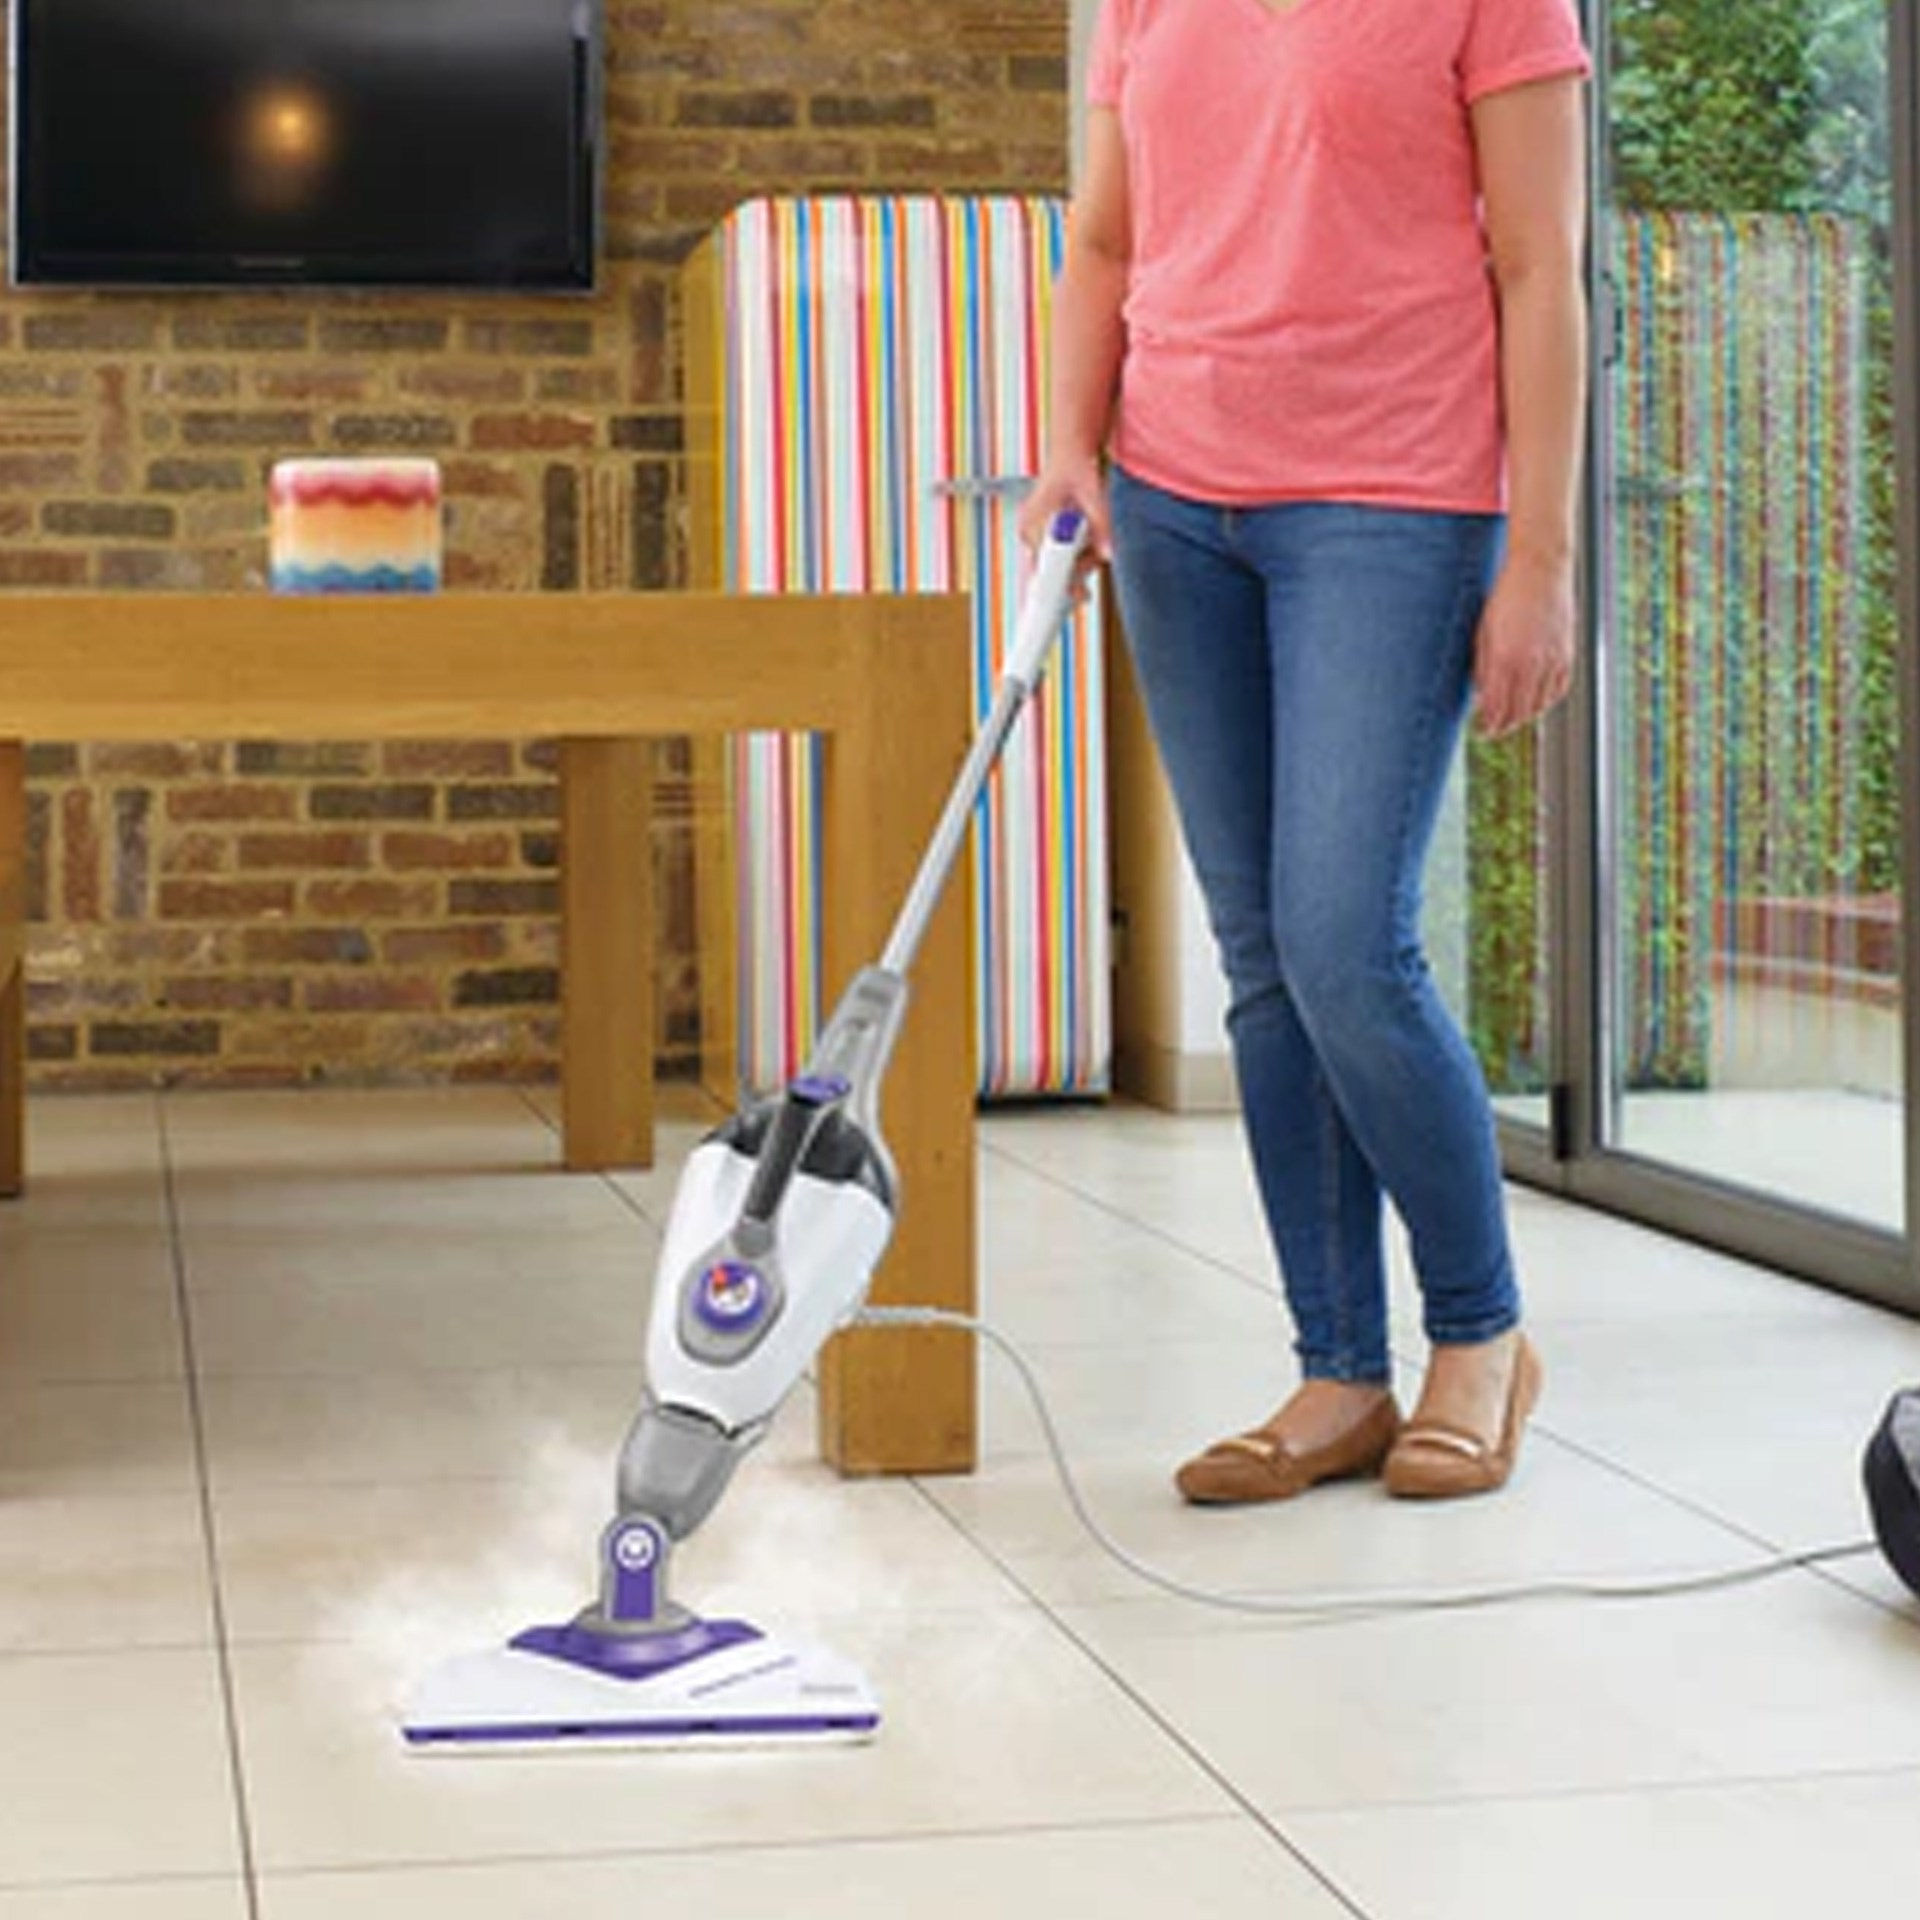 1600W 2in1 Steam-Mop™ with Delta Head, SteaMitt™ and 13 accessories